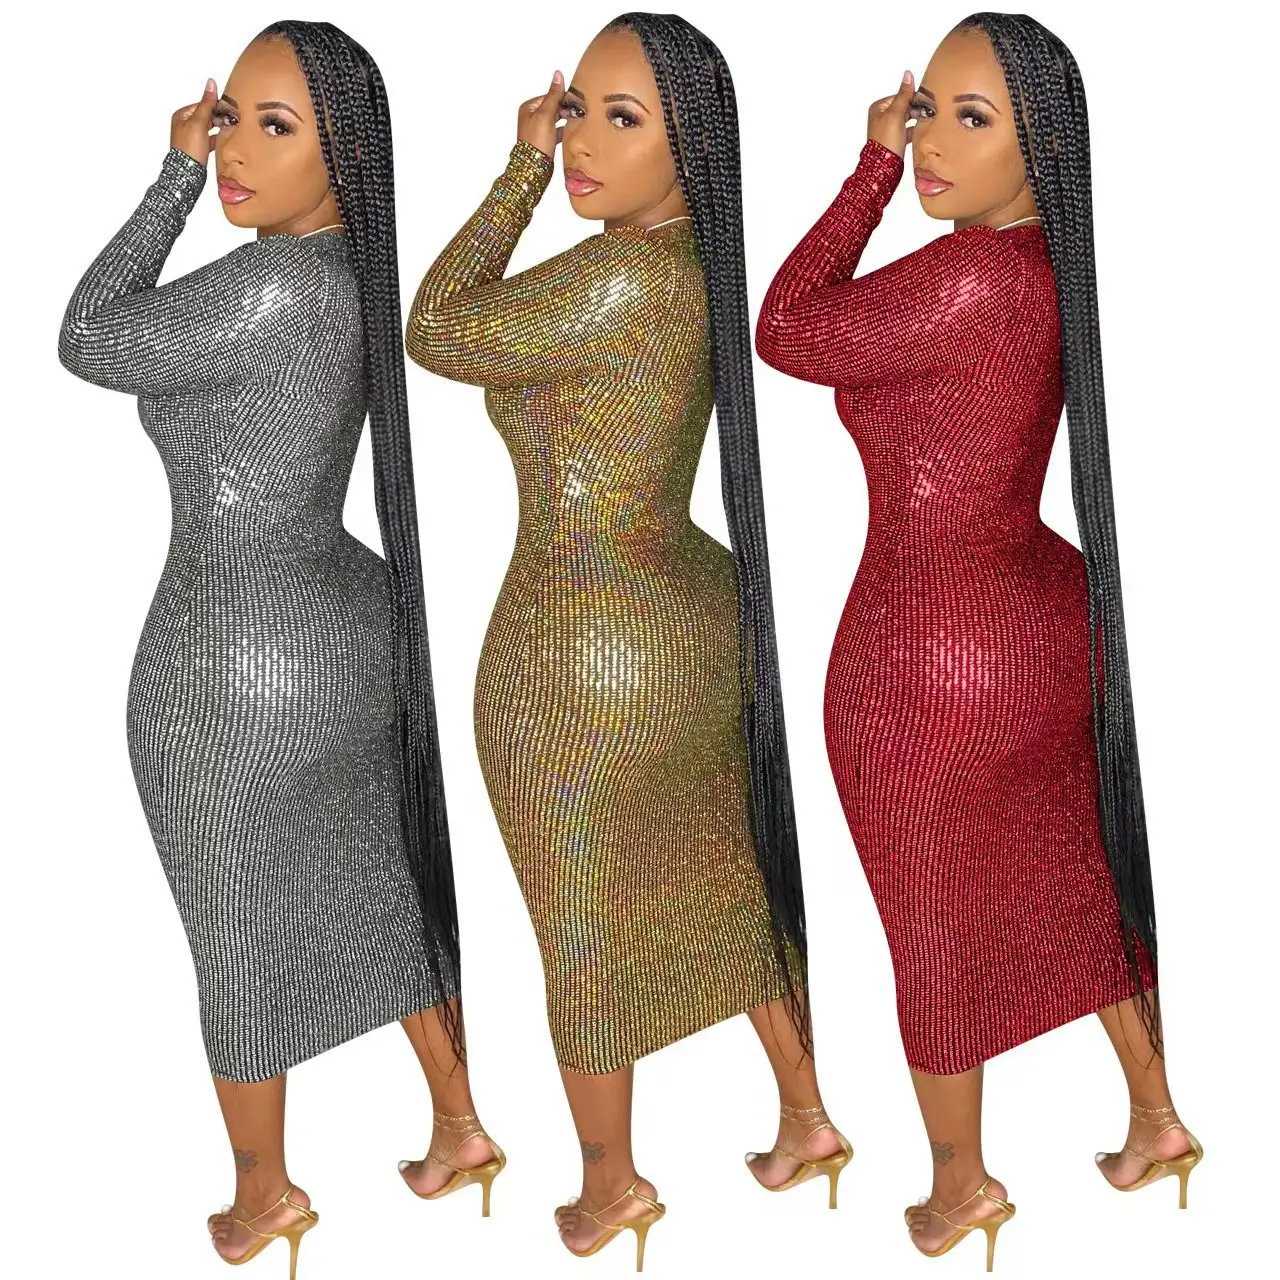 2022 new Gilded fabric plunging neckline dress fashion long sleeve 3 colors sexy night club dress for women